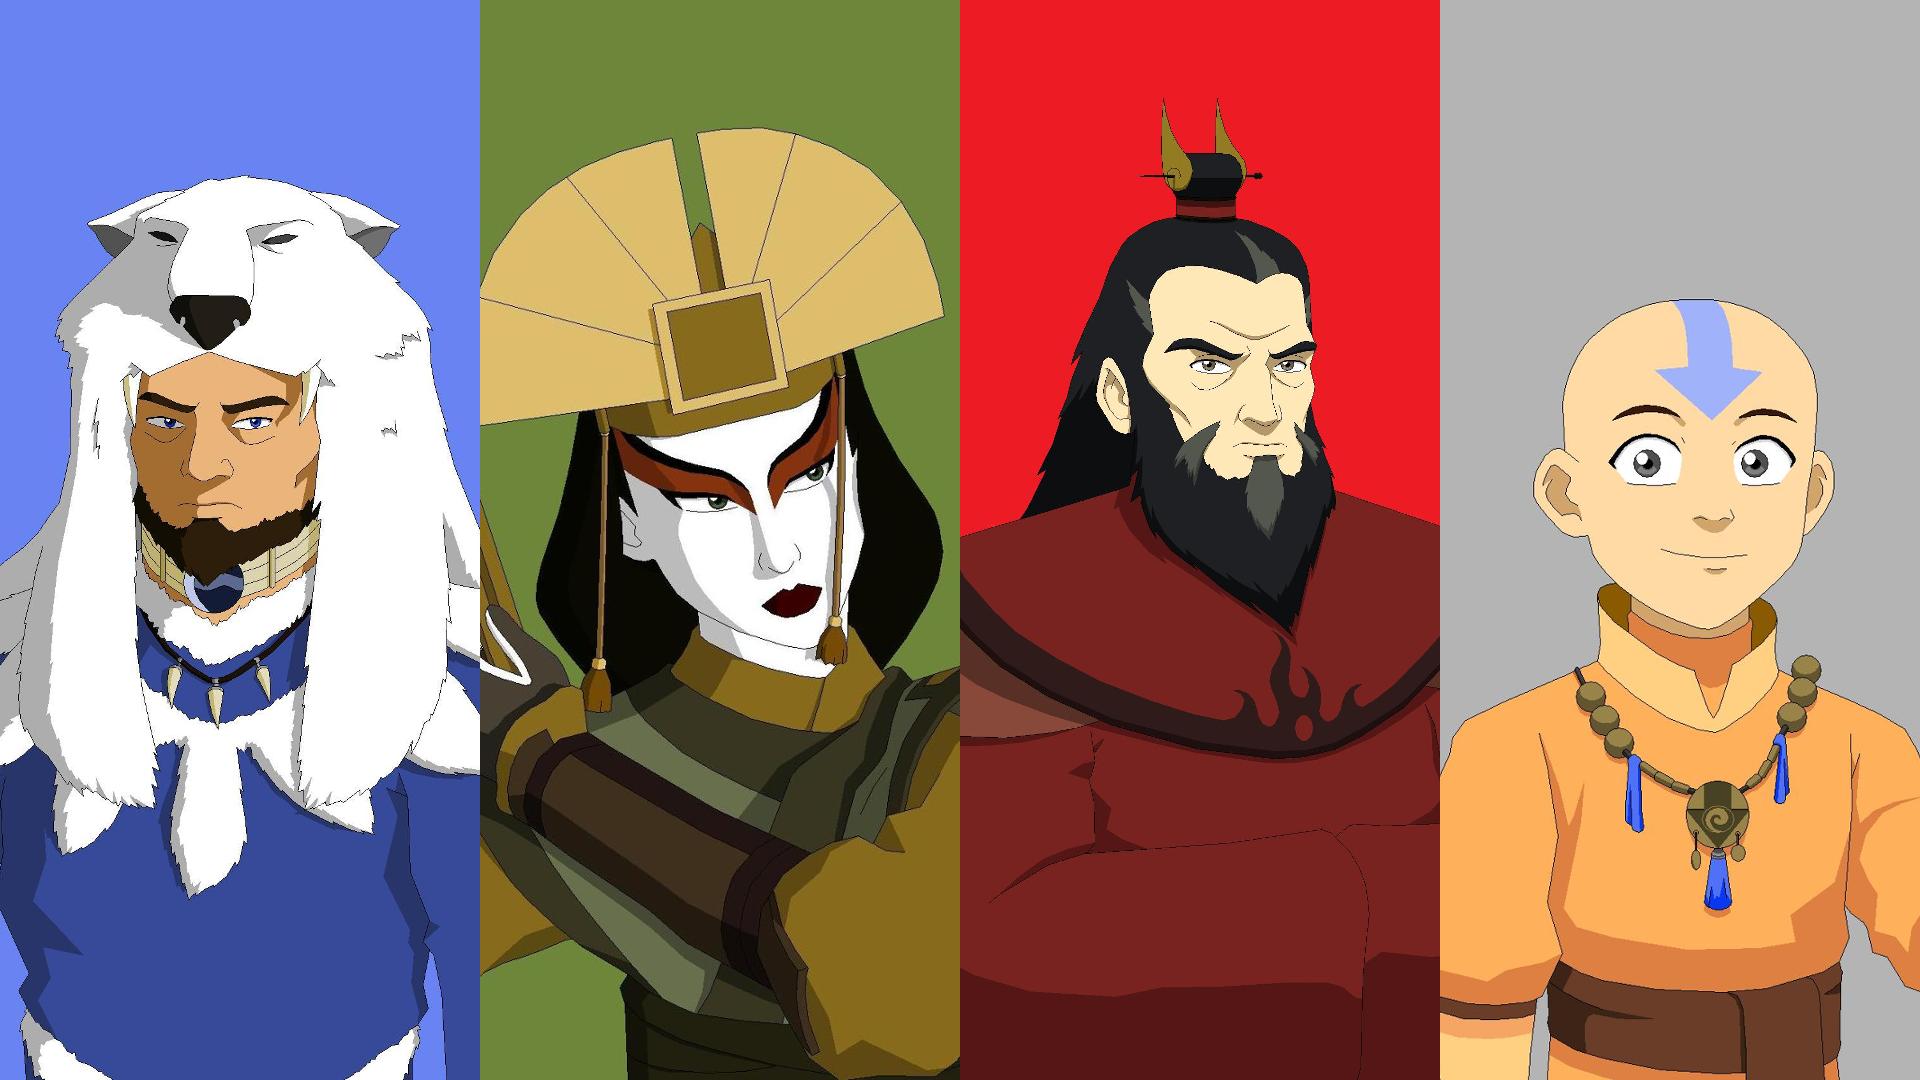 I made four wallpaper with the Avatars from Kuruk to Aang (all 1920x1080)